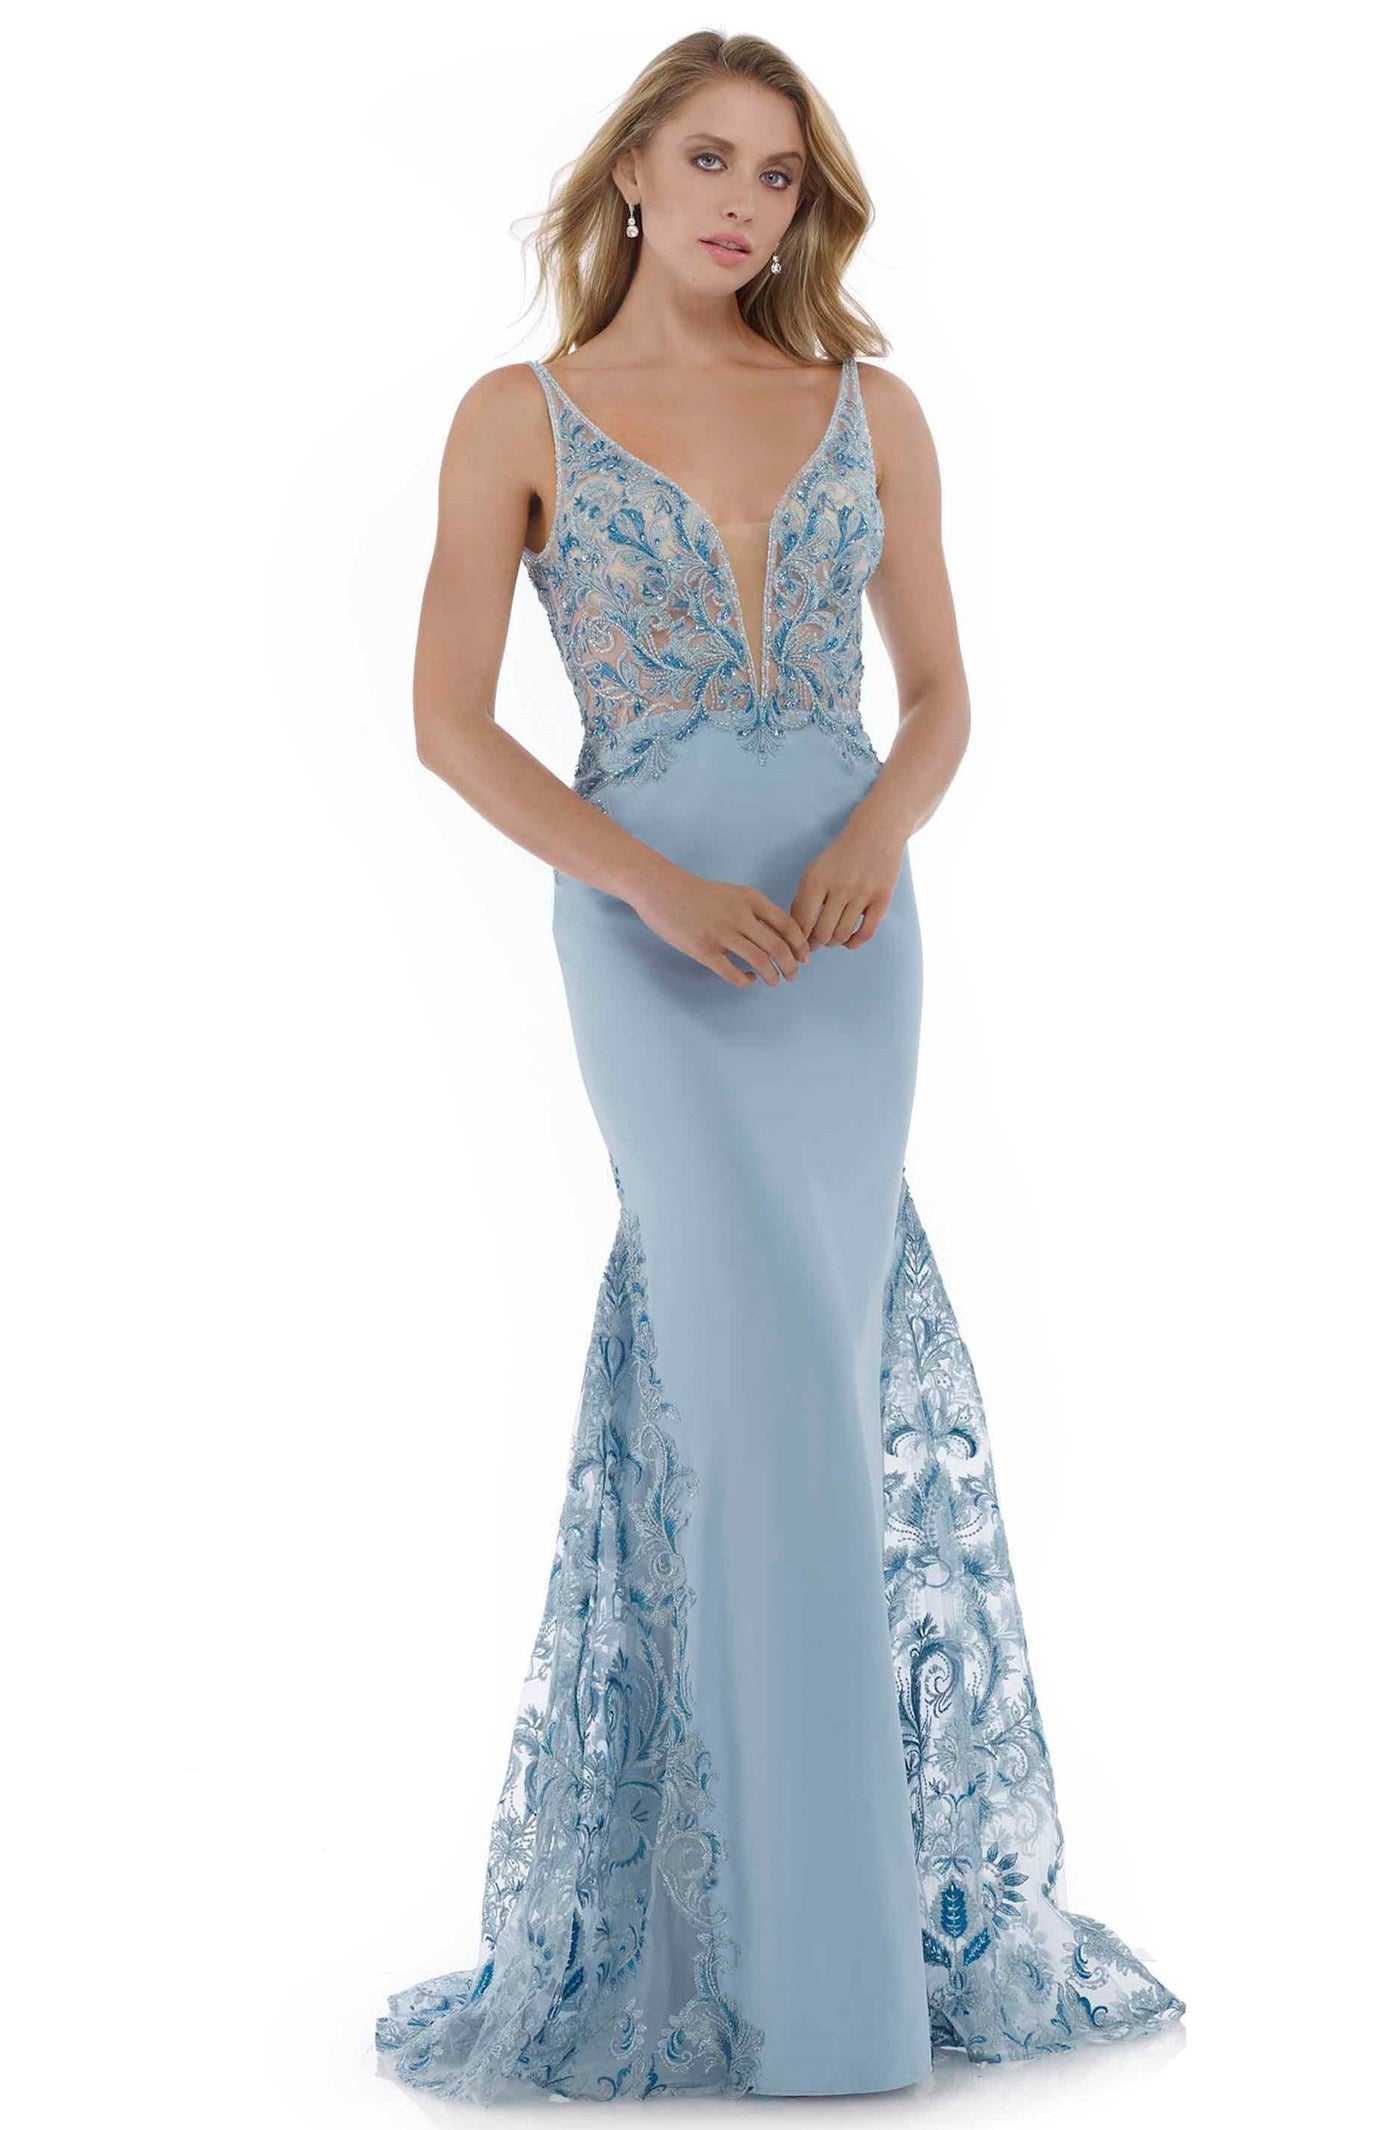 Morrell Maxie - 16098 Embroidered Deep V-neck Mermaid Dress in Blue